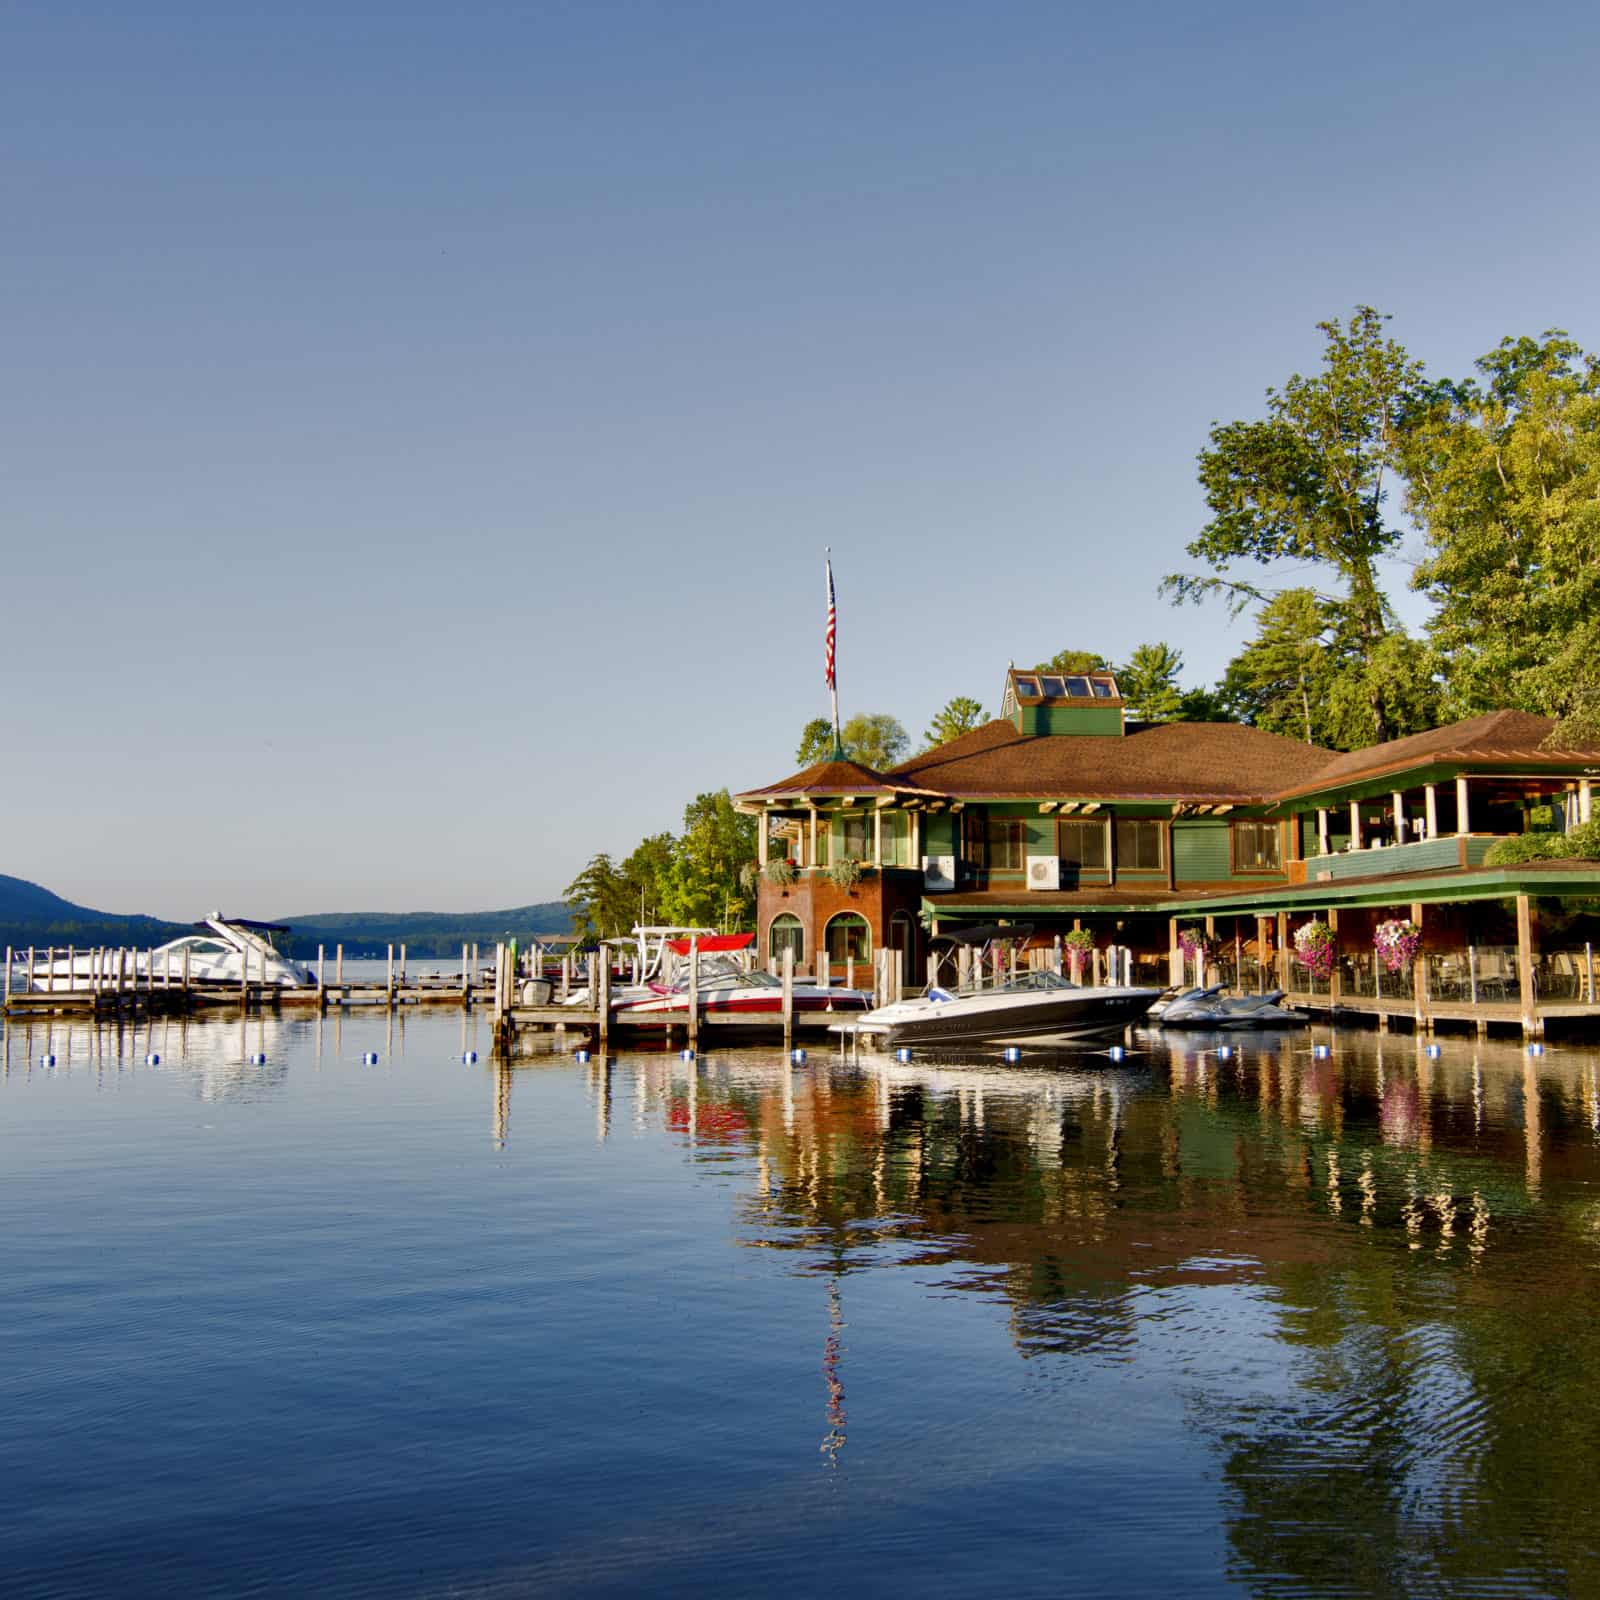 Rent a $200 private island in Lake George, New York